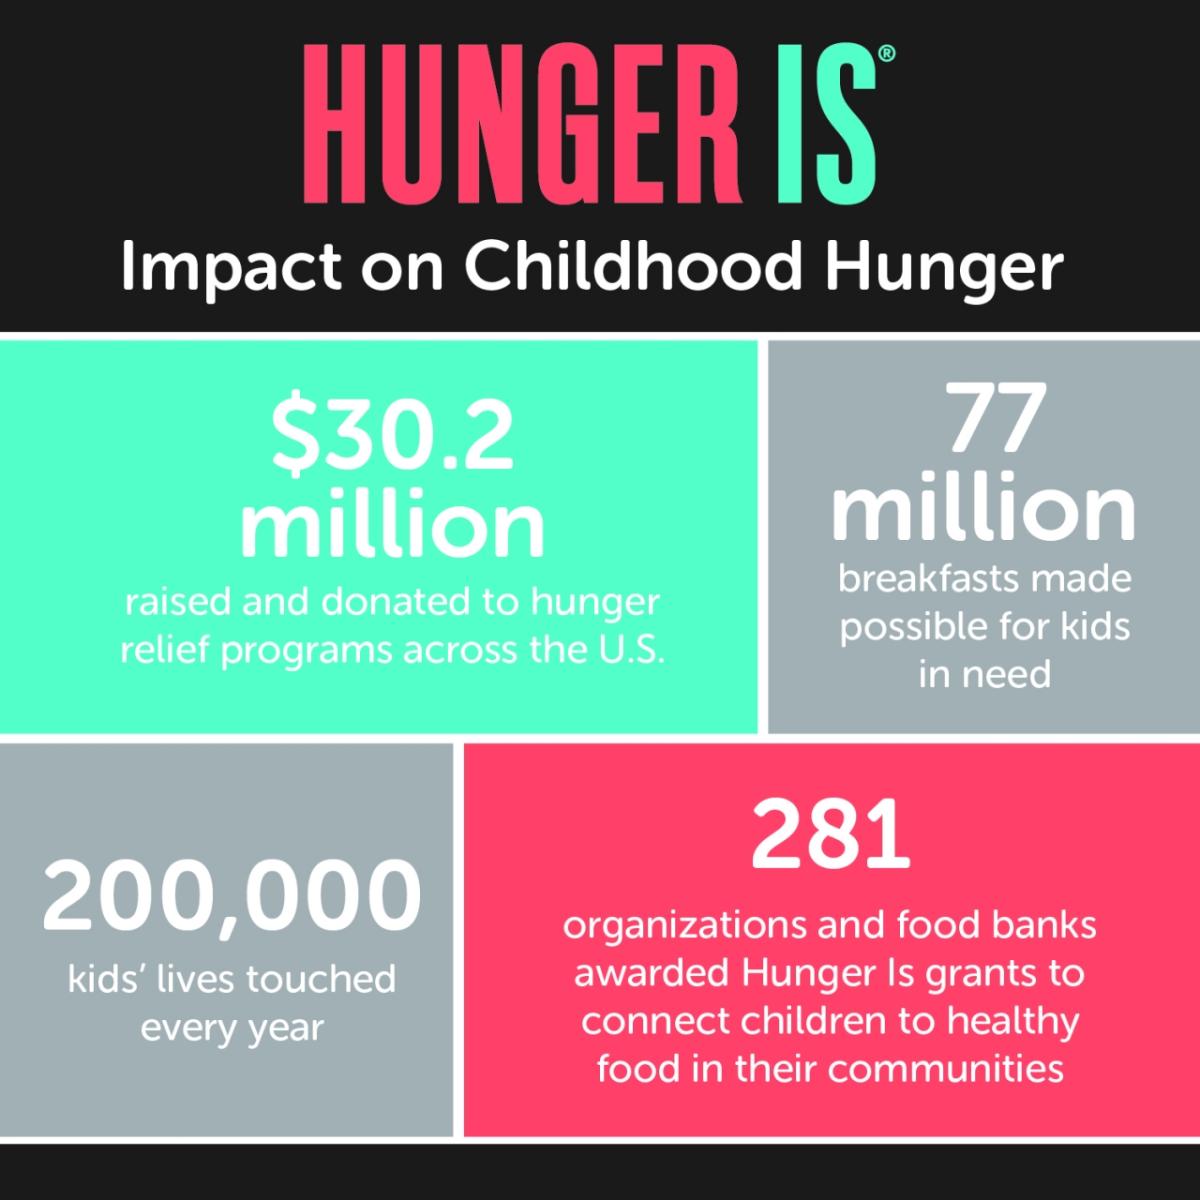 Hunger Is: Impact on Childhood Hunger.